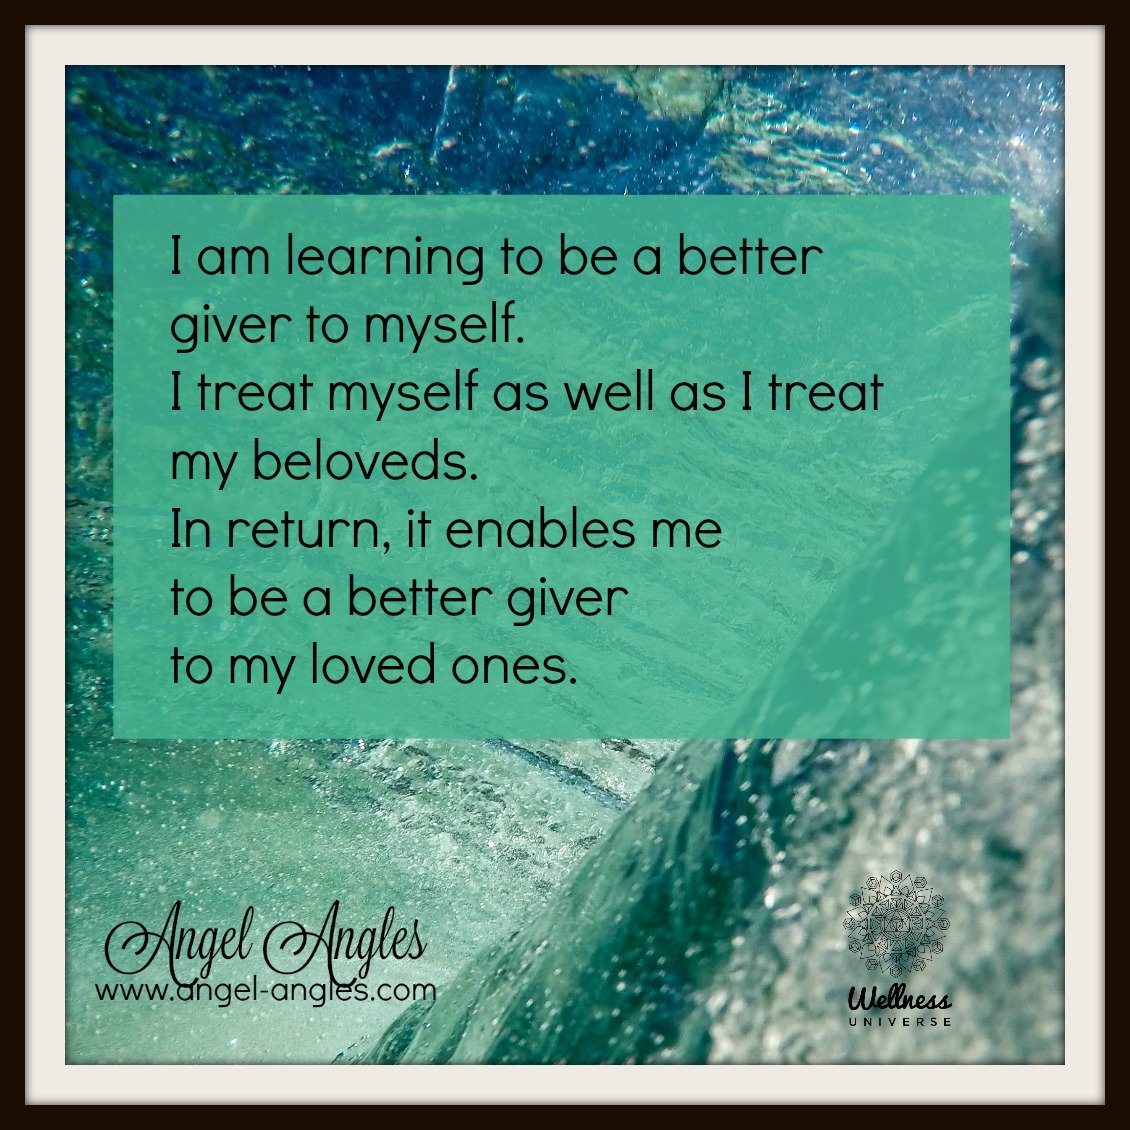 A reminder to fill your cup first. Self-care and self-love improve every relationship we have. You are worthy and deserving of this excellent care. 

Blessings of love, joy, and peace.
Love,
Janette 
.
.
#WUVIP #WUWorldChanger #SelfCare #Receive